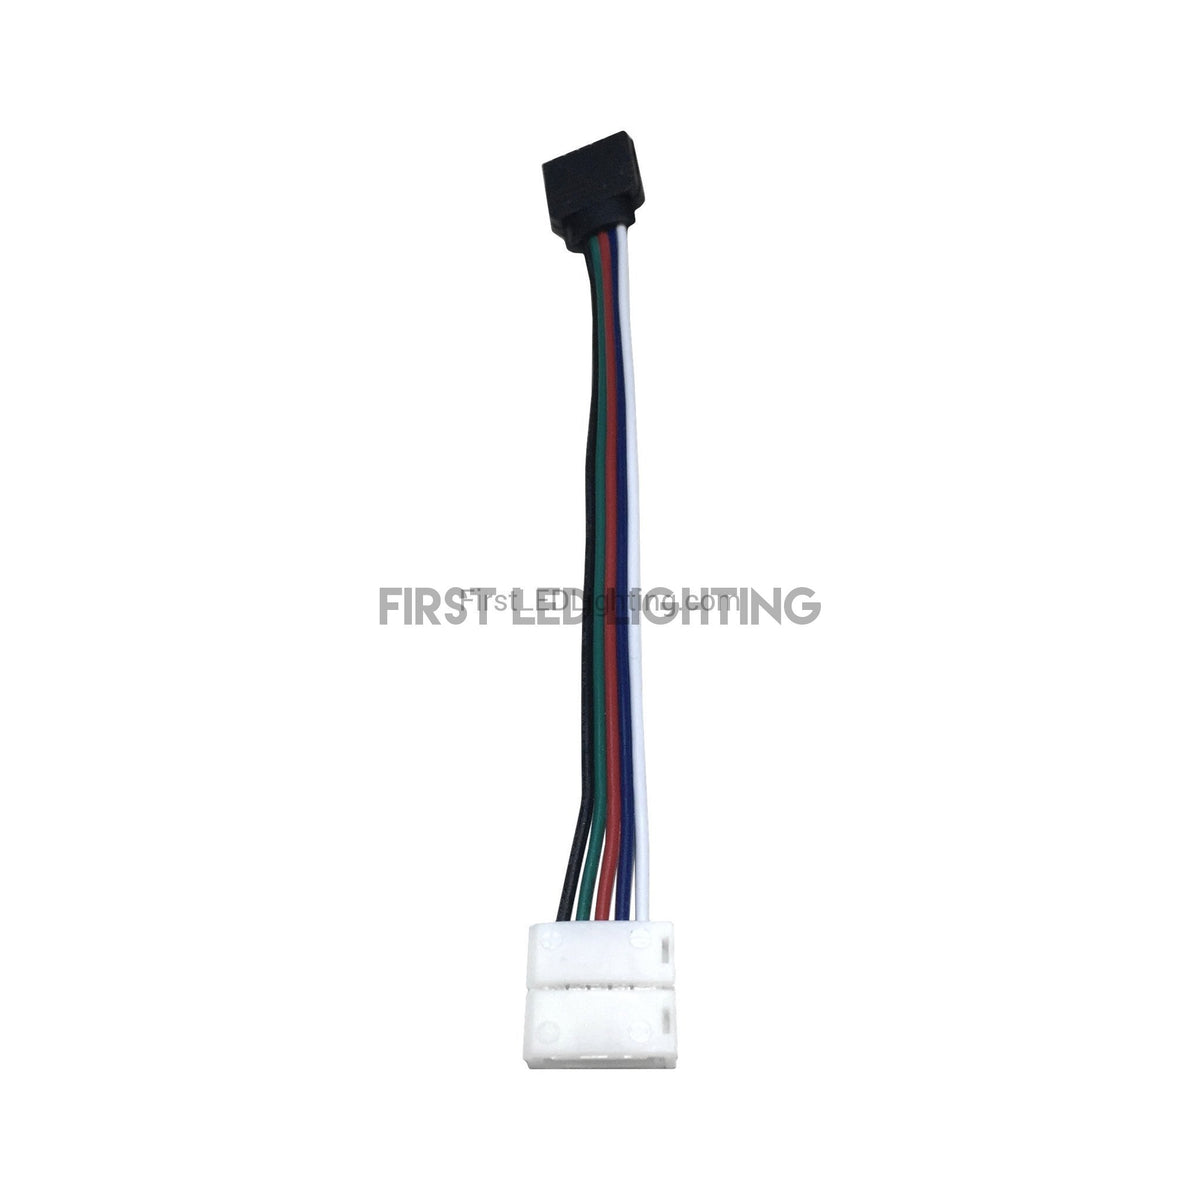 5-pin 10mm rgbw connectors for rgbw led strips to wire connection